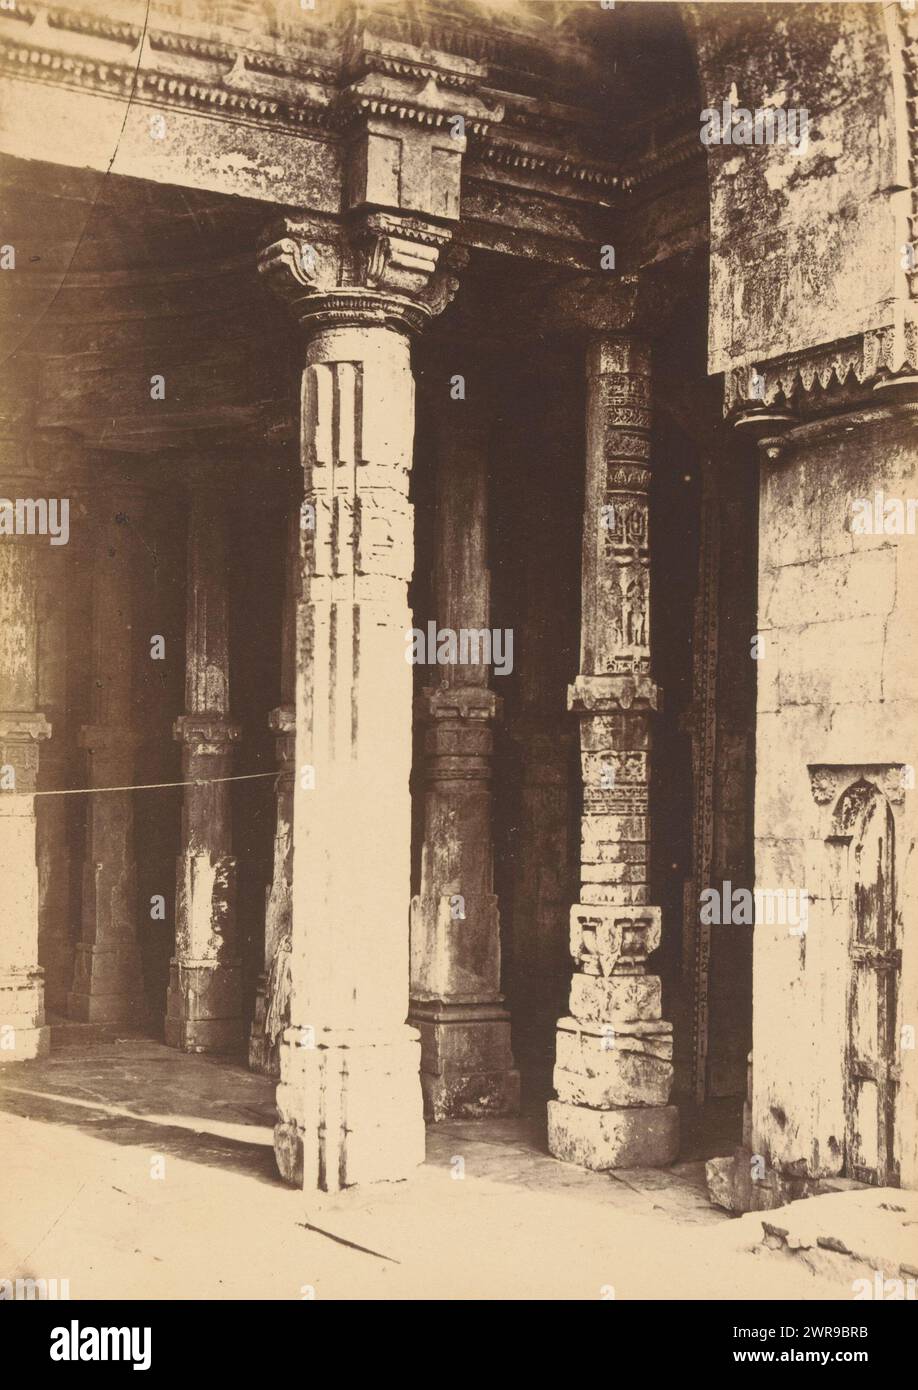 Pillars of Ahmed Shah's Mosque in Ahmedabad, Ahmed Shah's Mosque.- Hindoo Pillars (title on object), Thomas Biggs, Ahmedabad, c. 1856 - in or before 1866, photographic support, albumen print, height 188 mm × width 136 mm, photograph Stock Photo